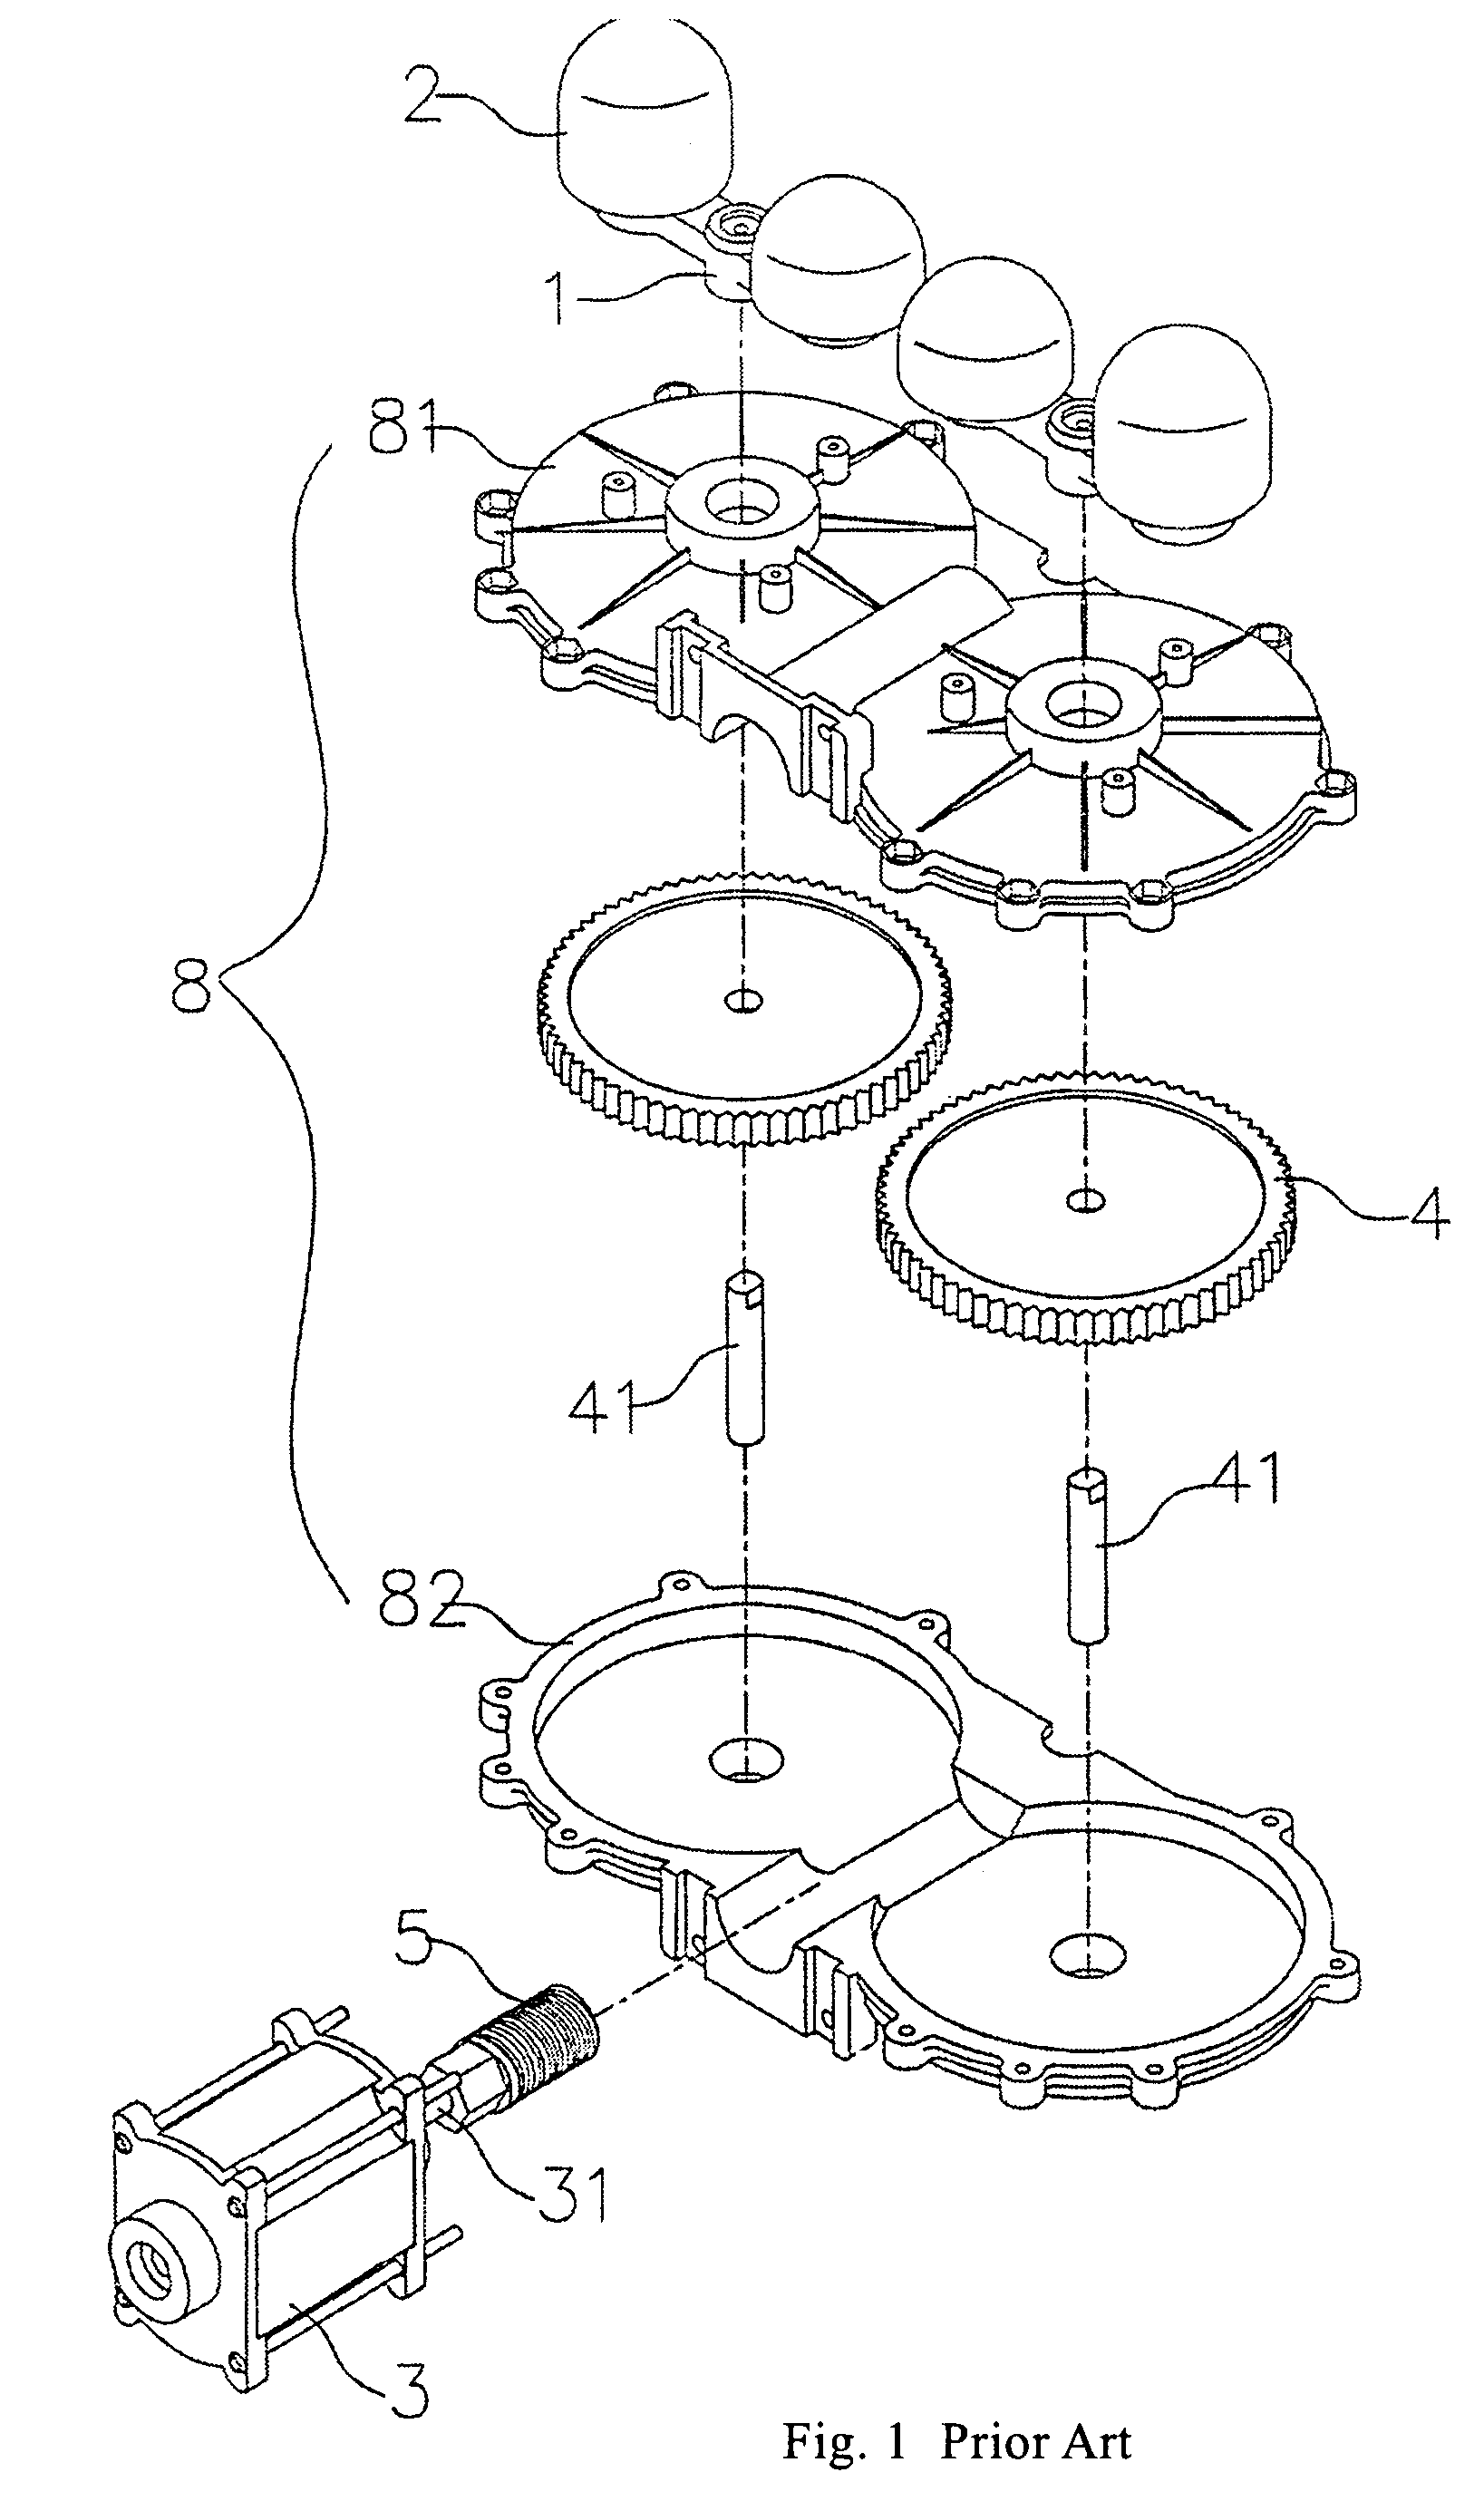 Far infra-red ray and anion emitting thermal rotary massager for decreasing fats in the abdominal region of a human body equipped with rotating electric connectors